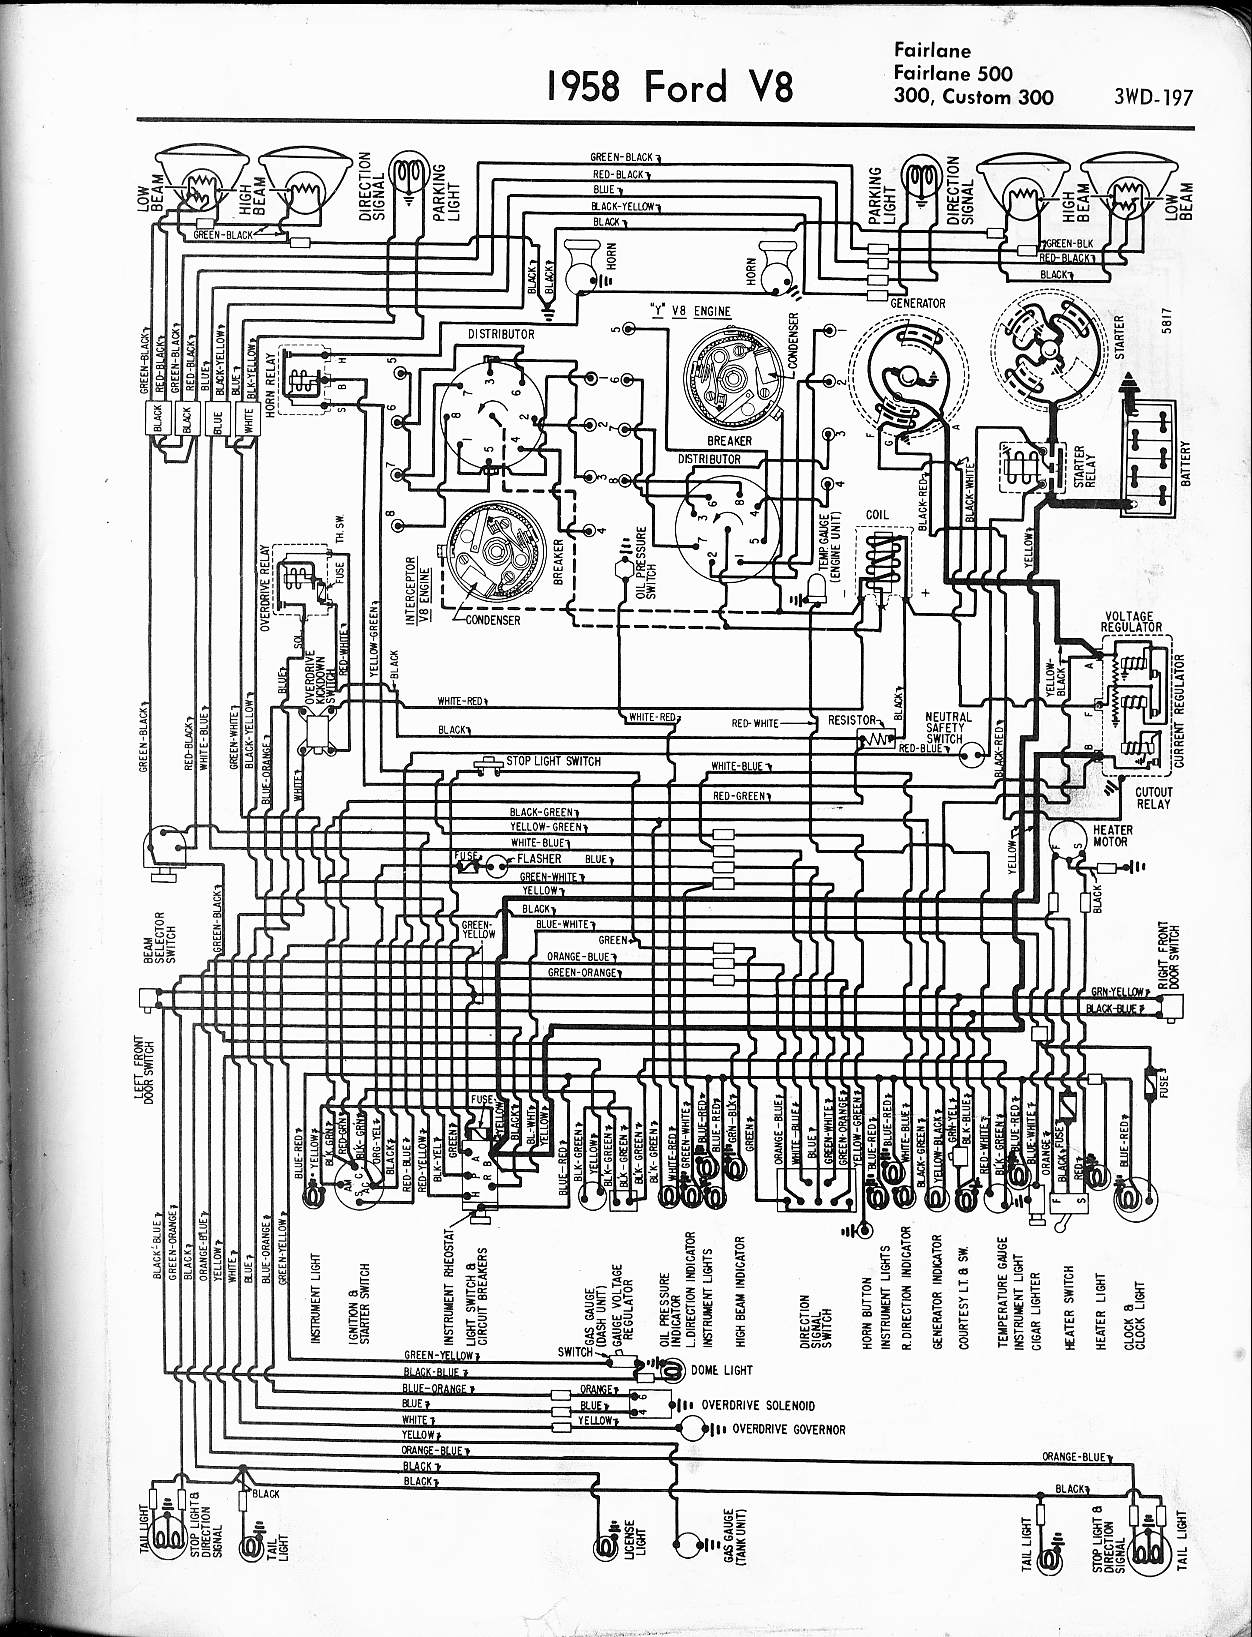 1974 Diagram ford free truck wiring